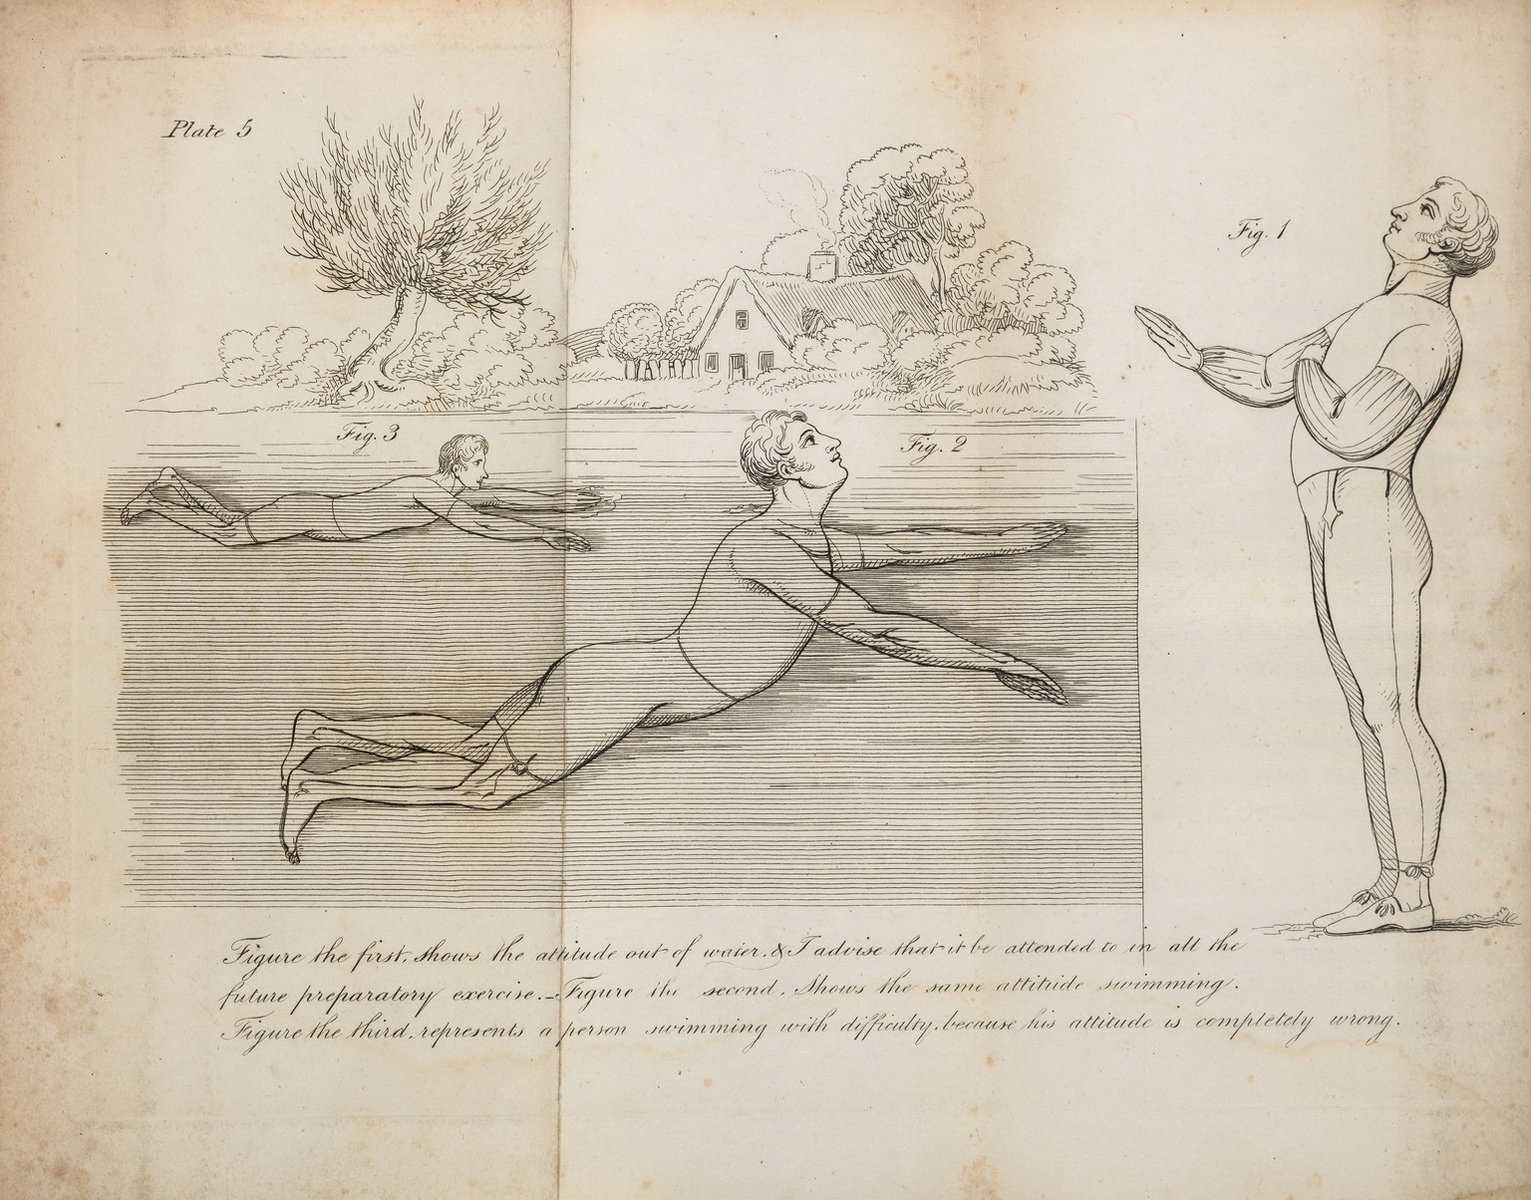 Swimming.- Frost (J.) Scientific Swimming, first edition, 1816.